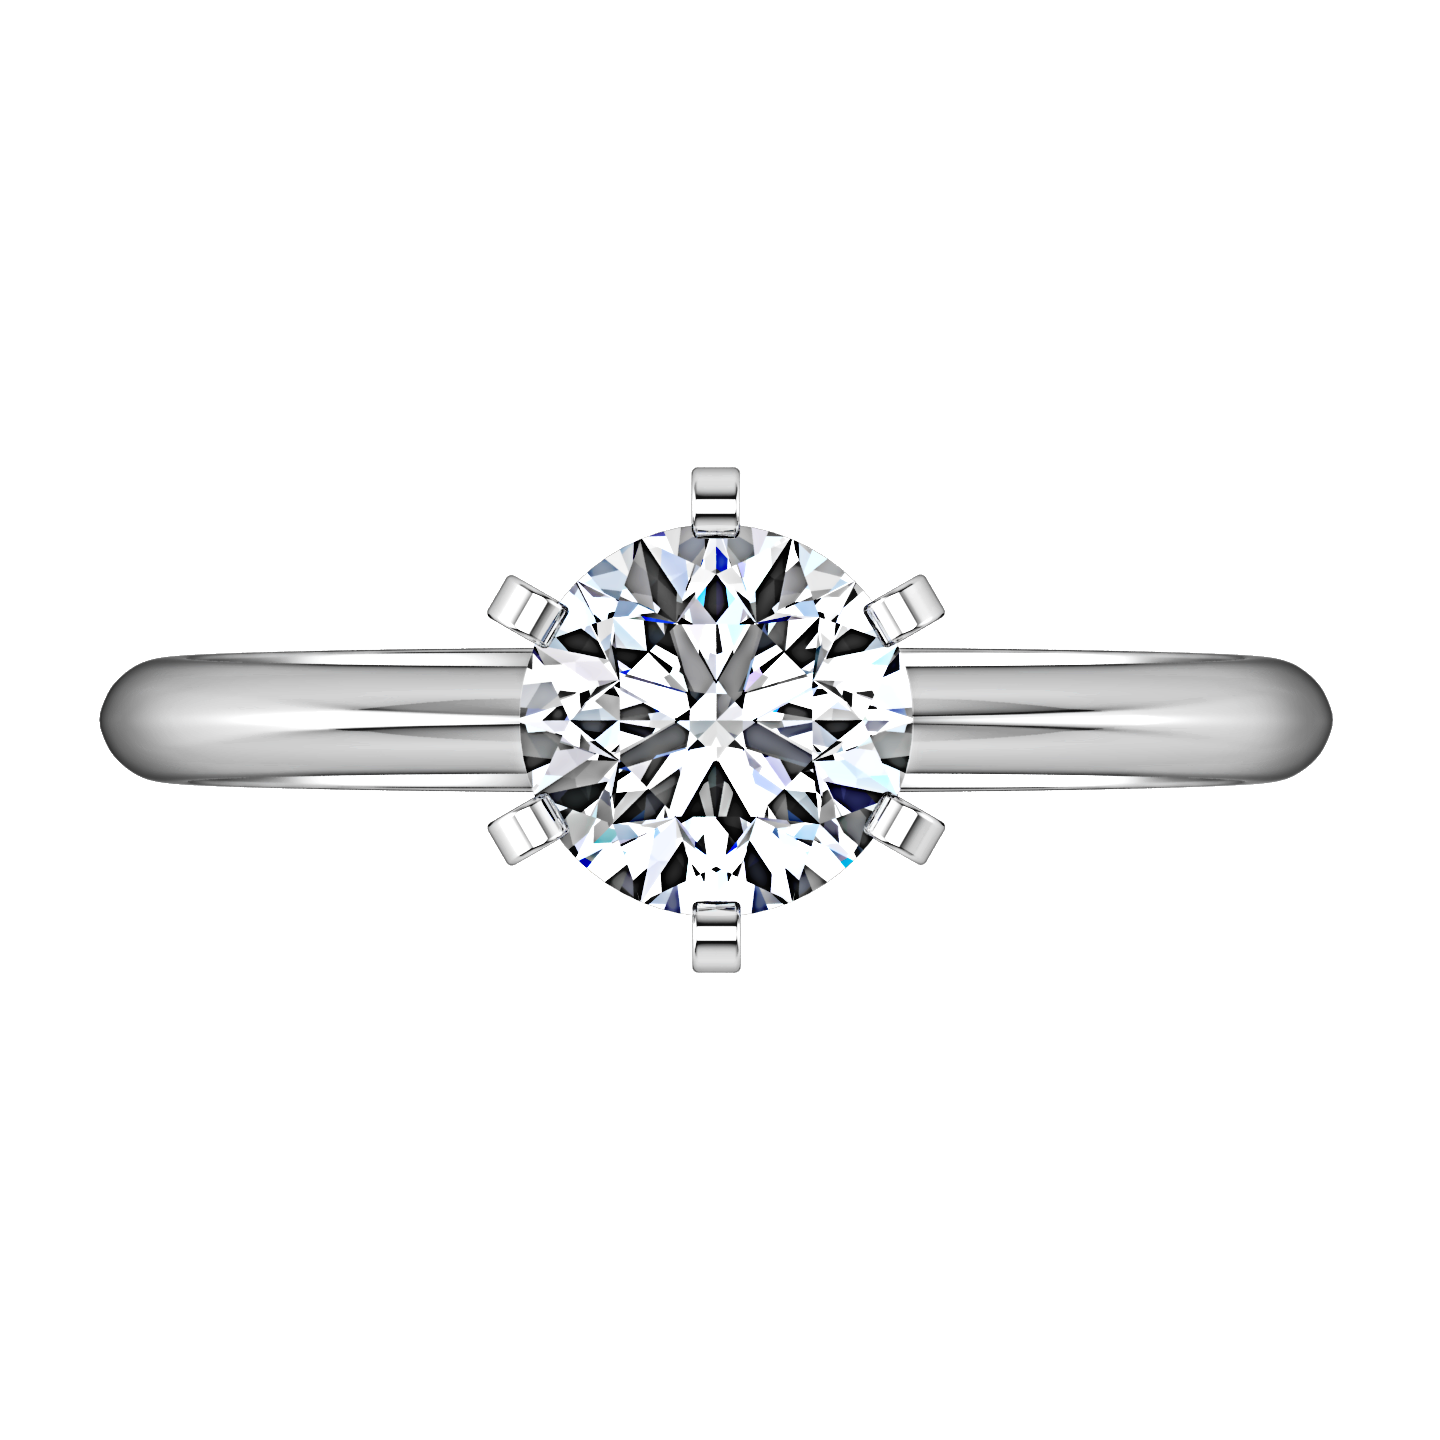 Solitaire Engagement Ring Classic 6 Prong